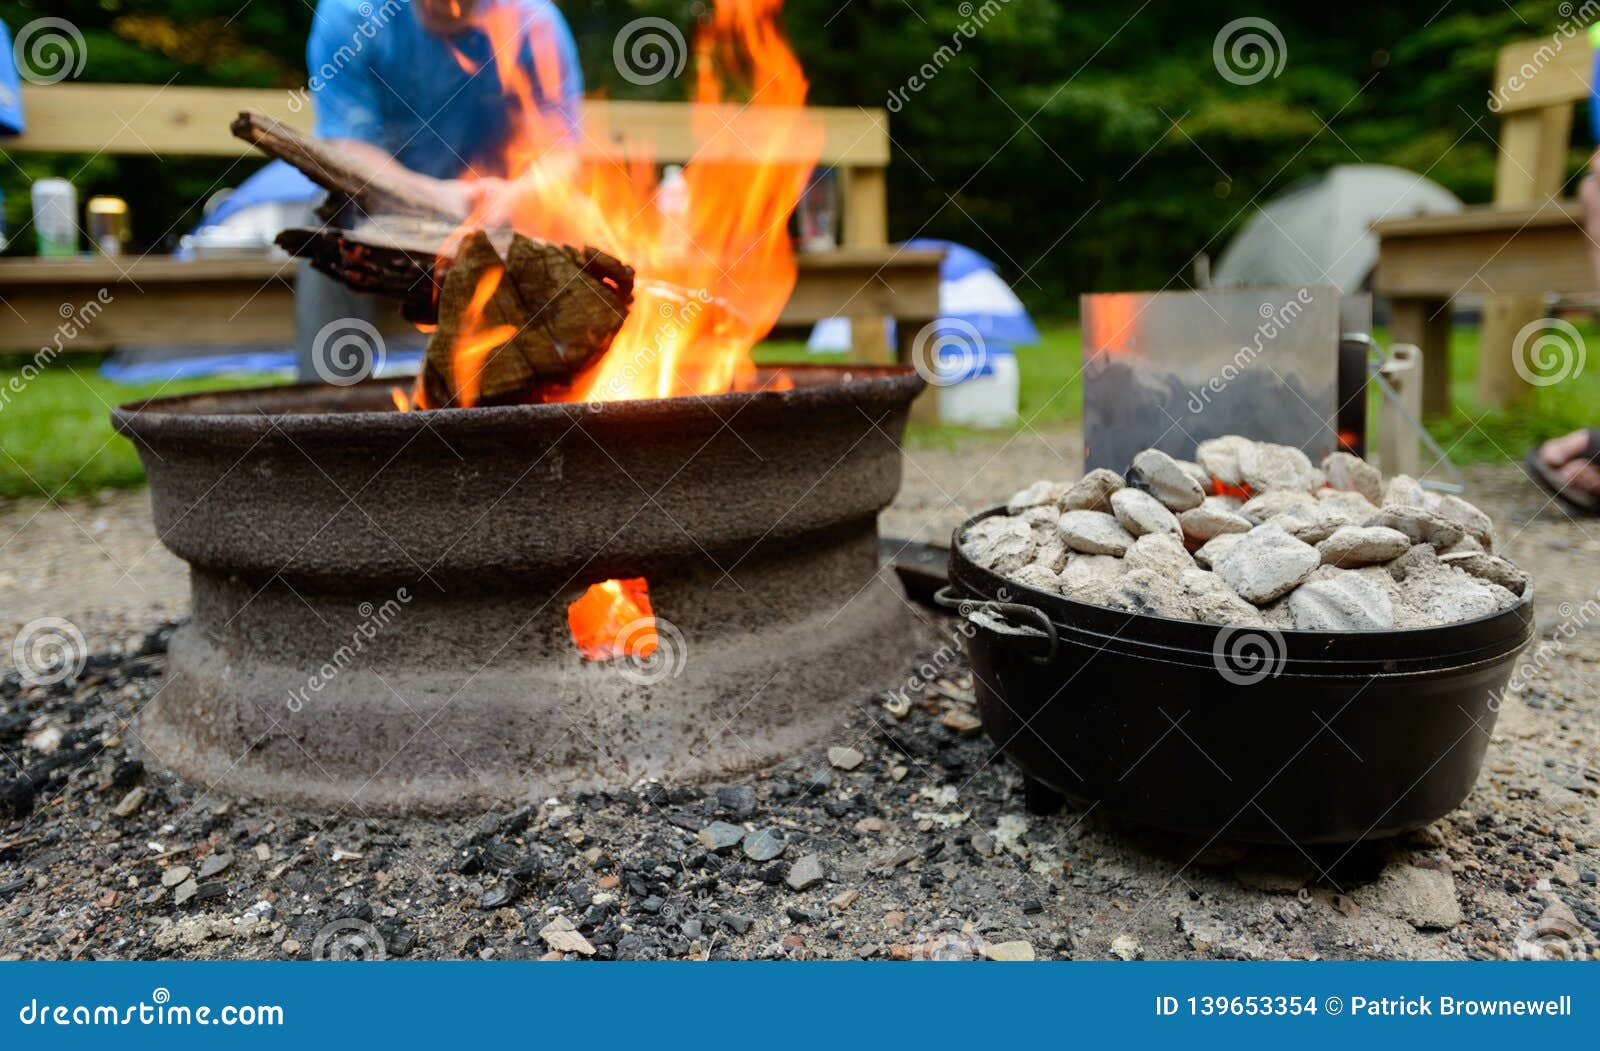 dutch oven cooking at campsite